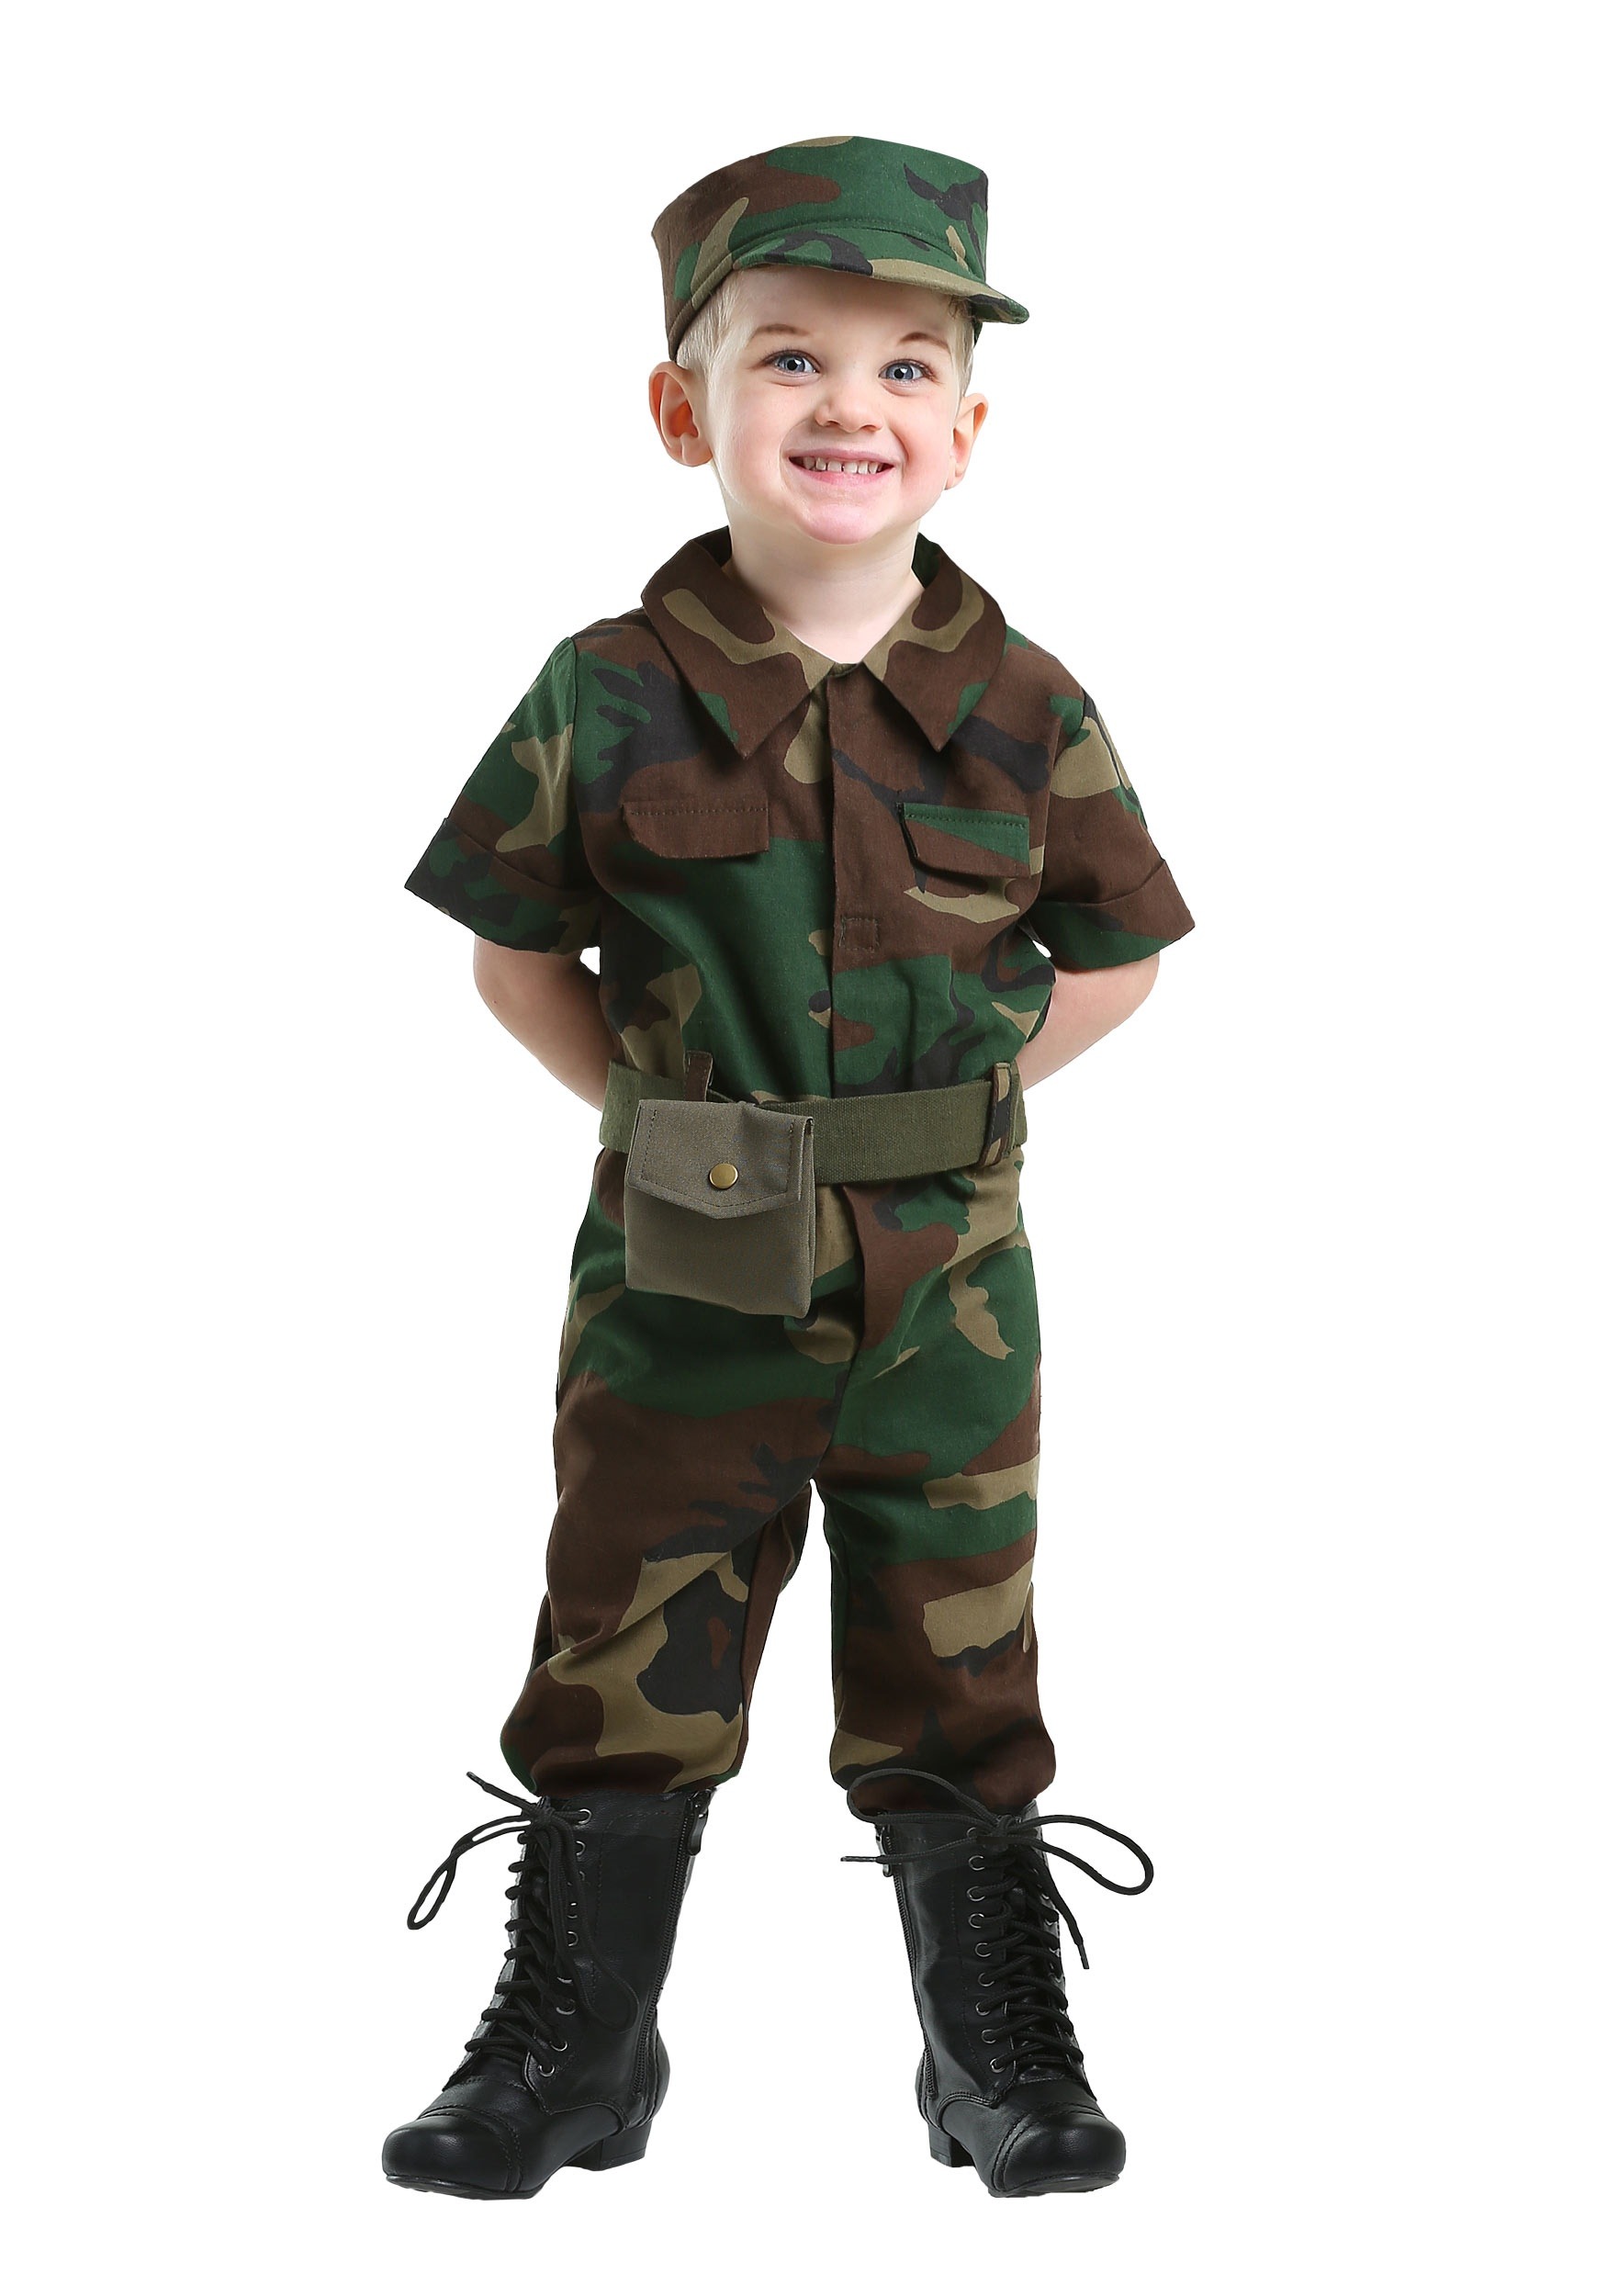 Instant Army Kids Costume Kit 